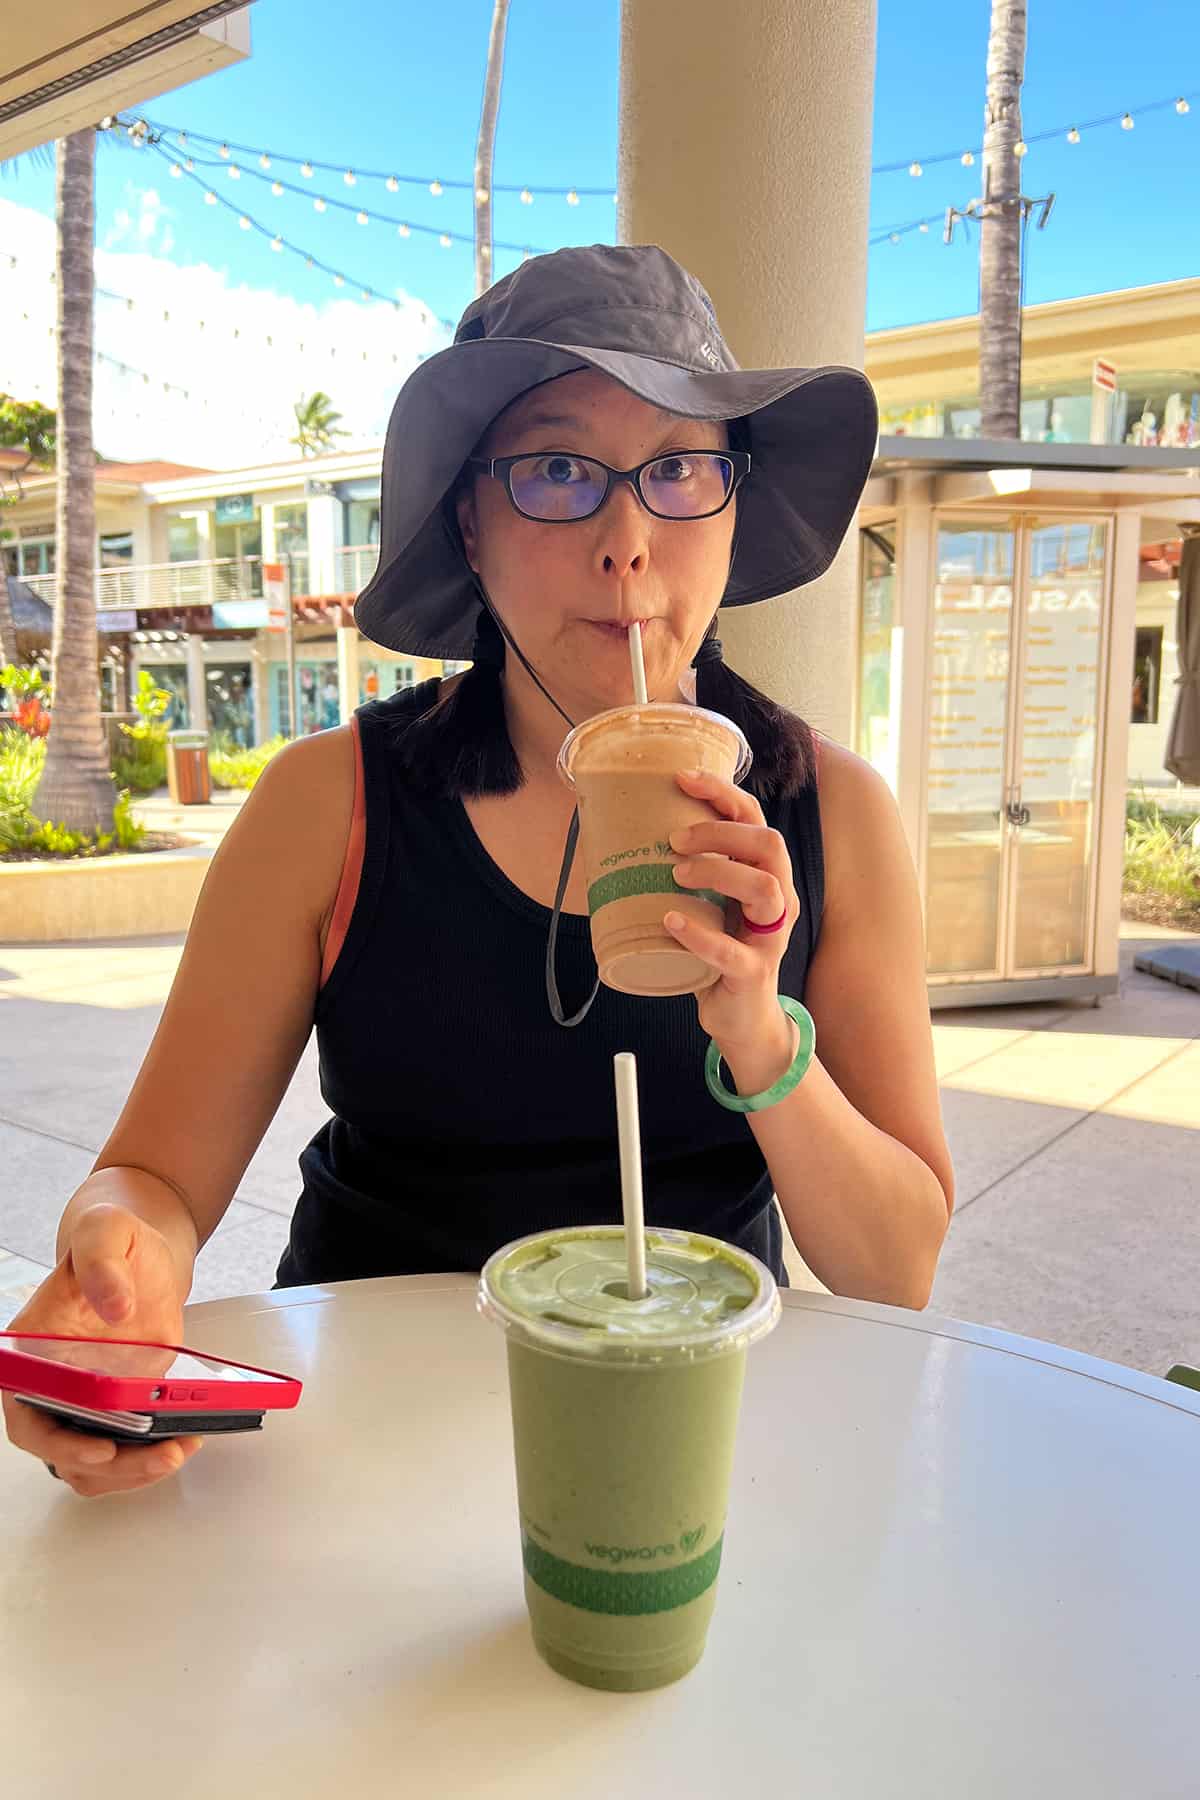 An Asian woman in a hat is drinking a brown smoothie while holding a red cell phone.